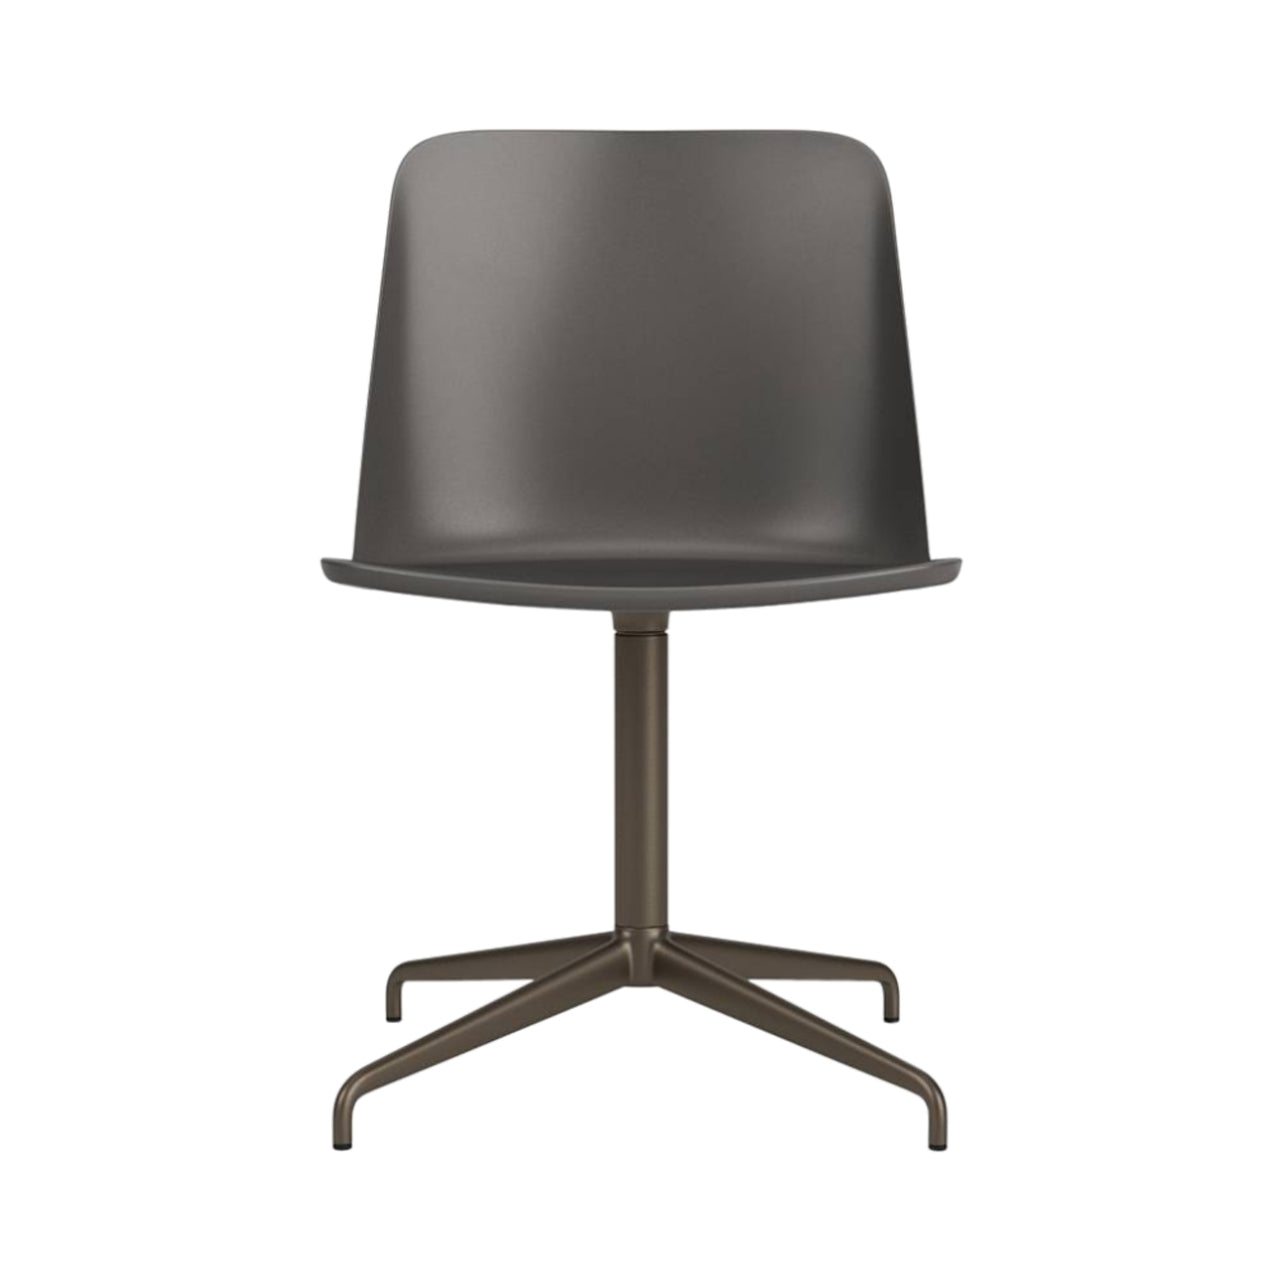 Rely Chair HW11: Stone Grey + Bronzed